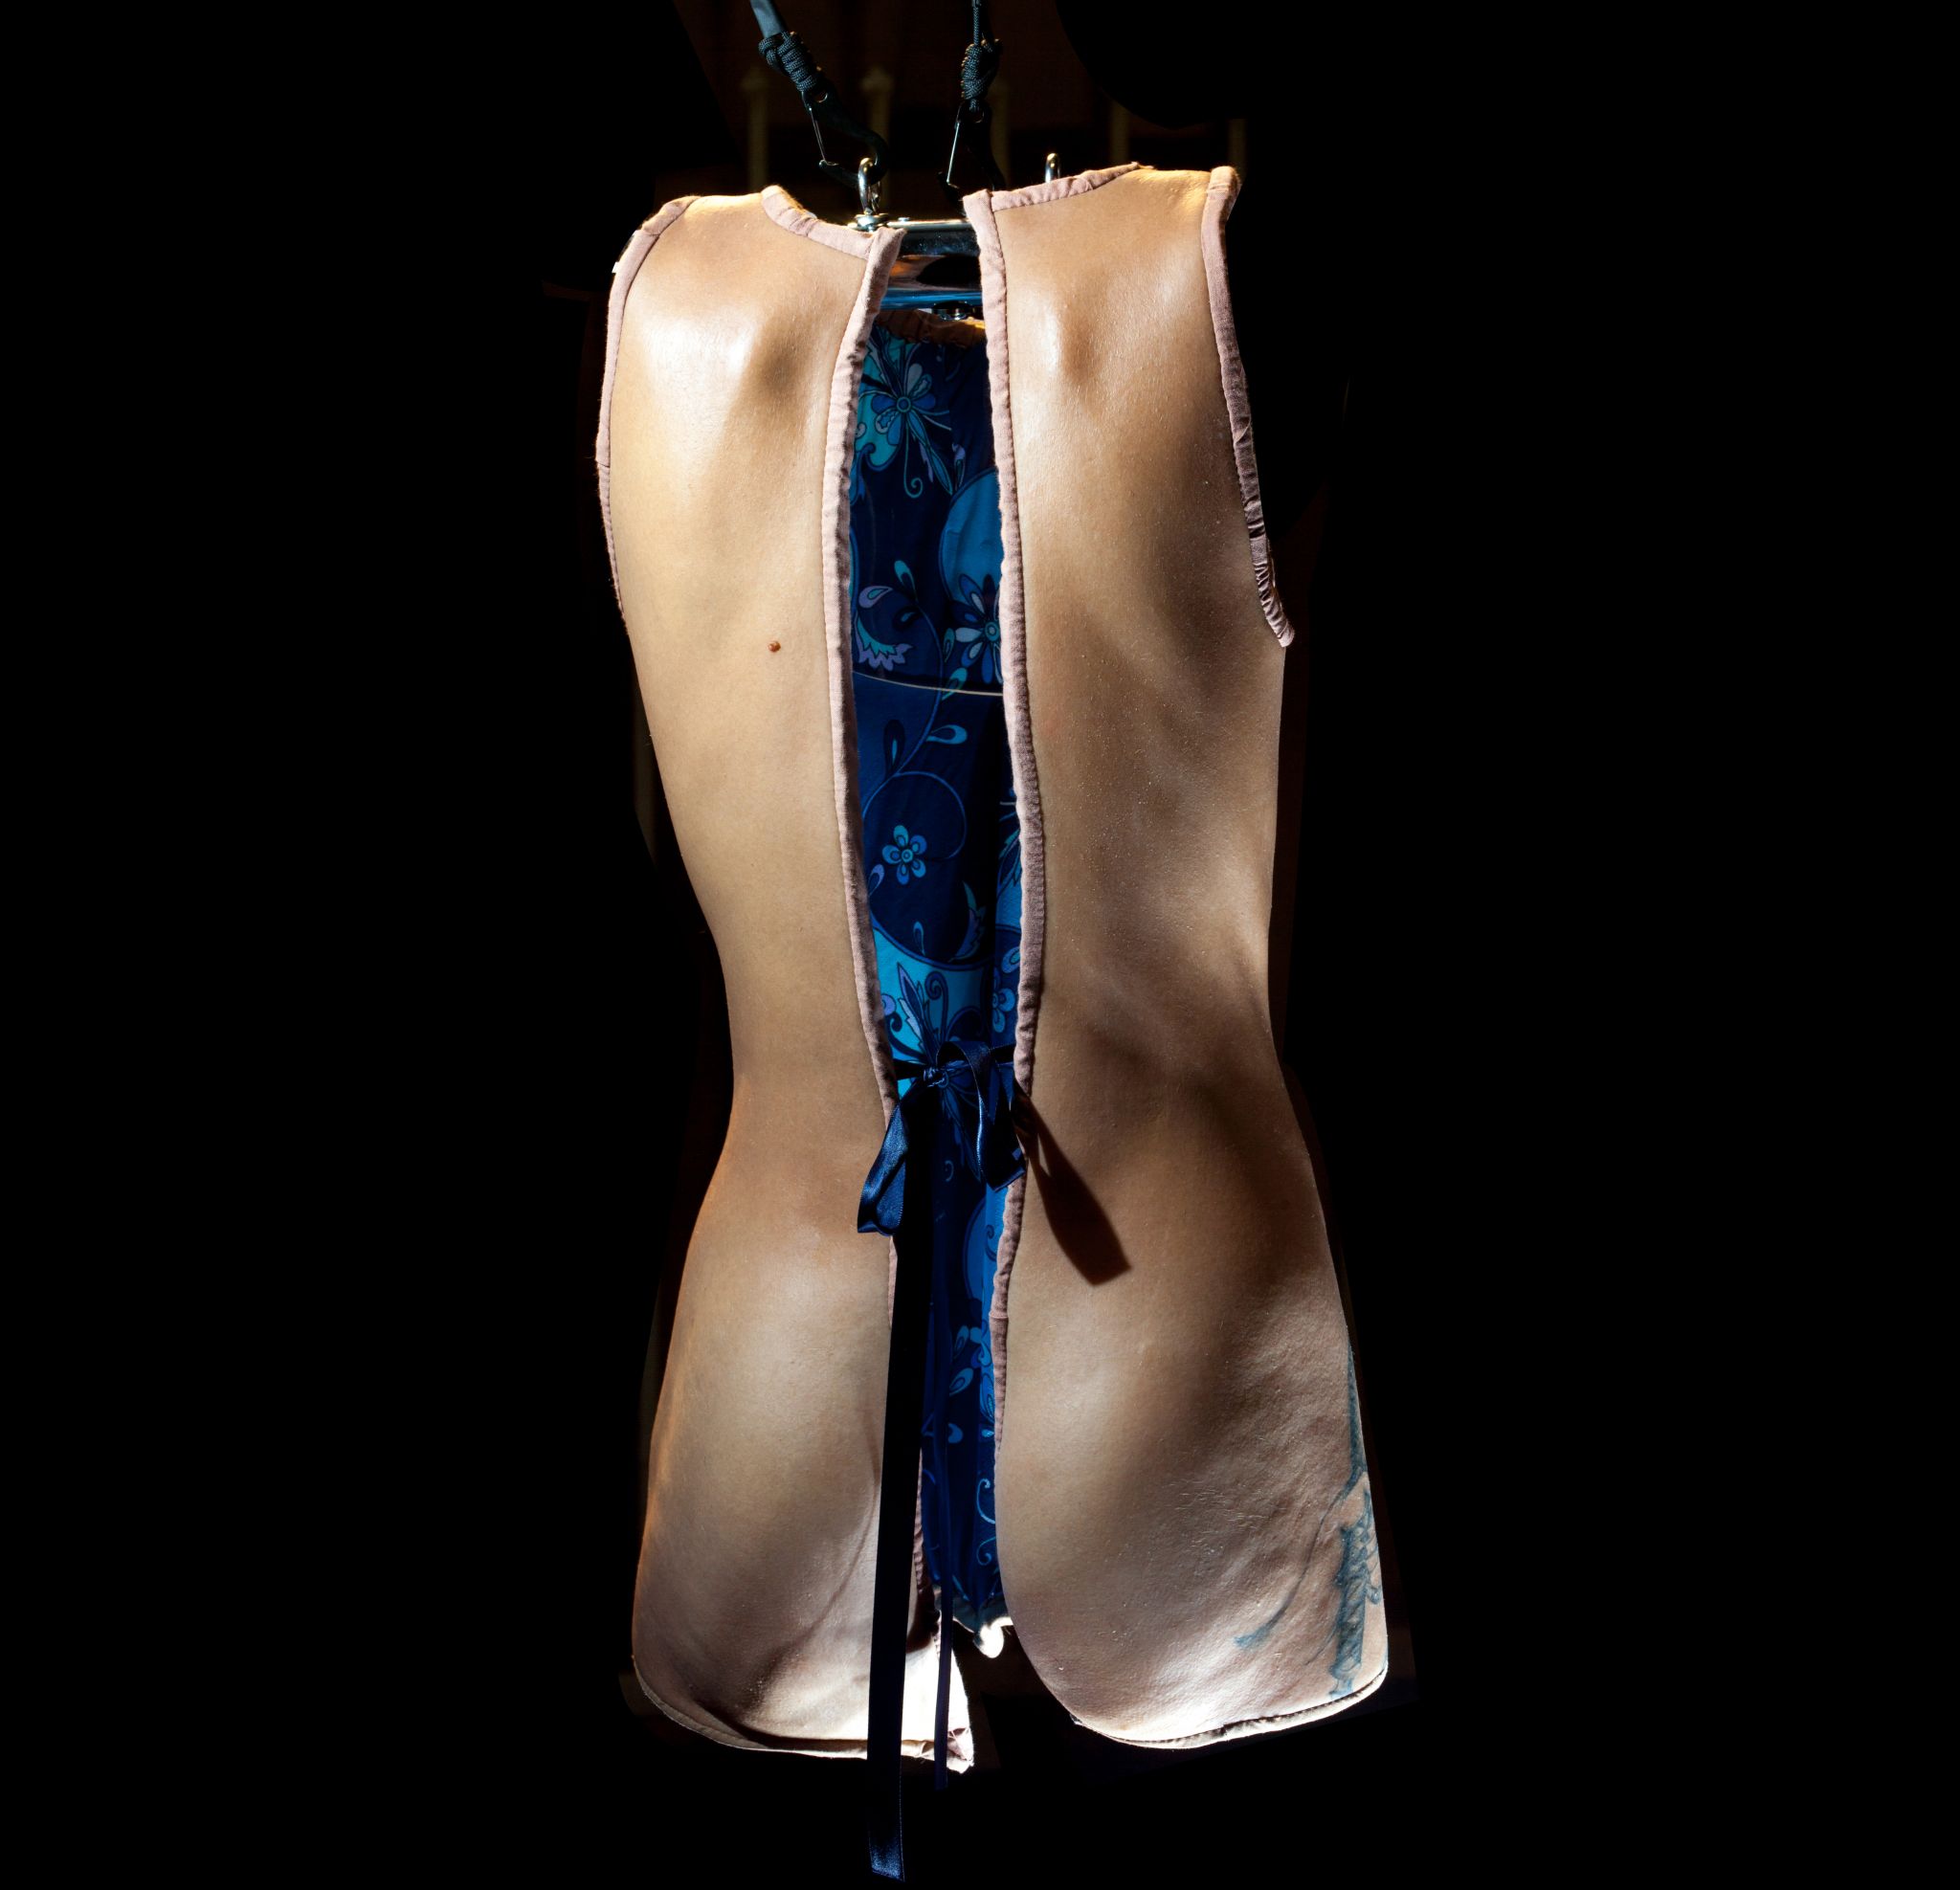 Sarah Sitkin's Bodysuits presents the human form as it really is